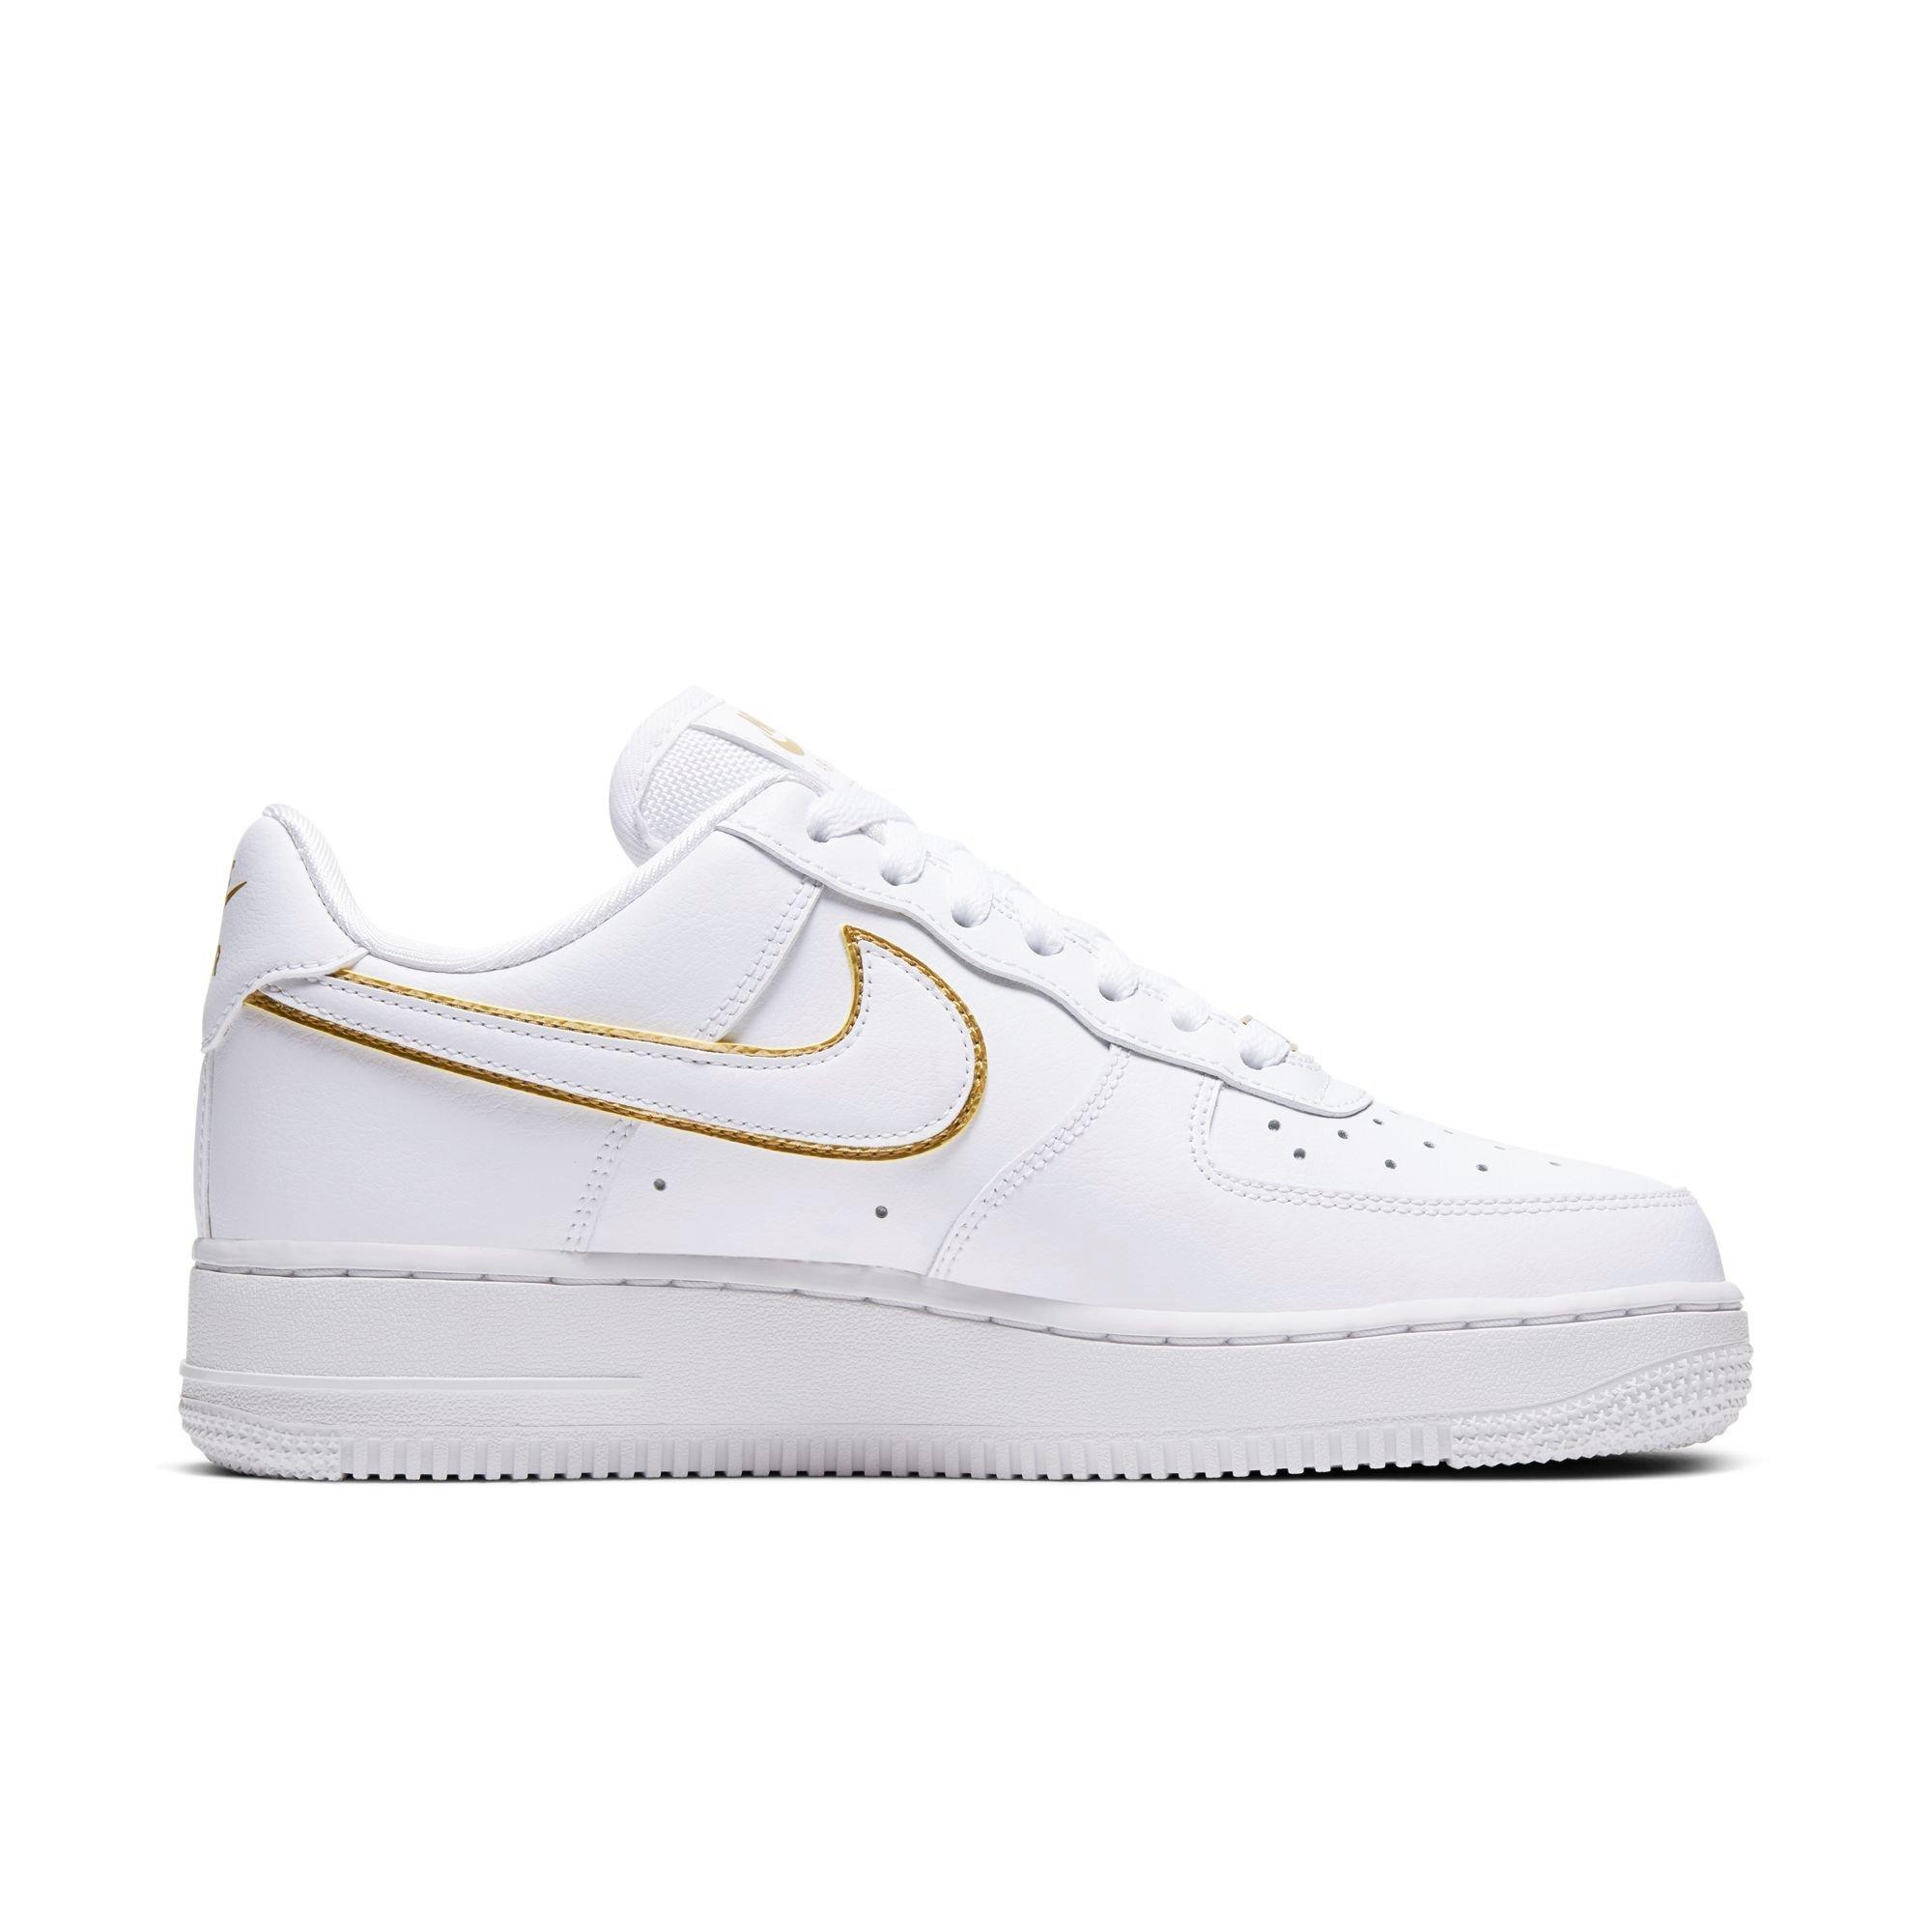 white air forces with gold